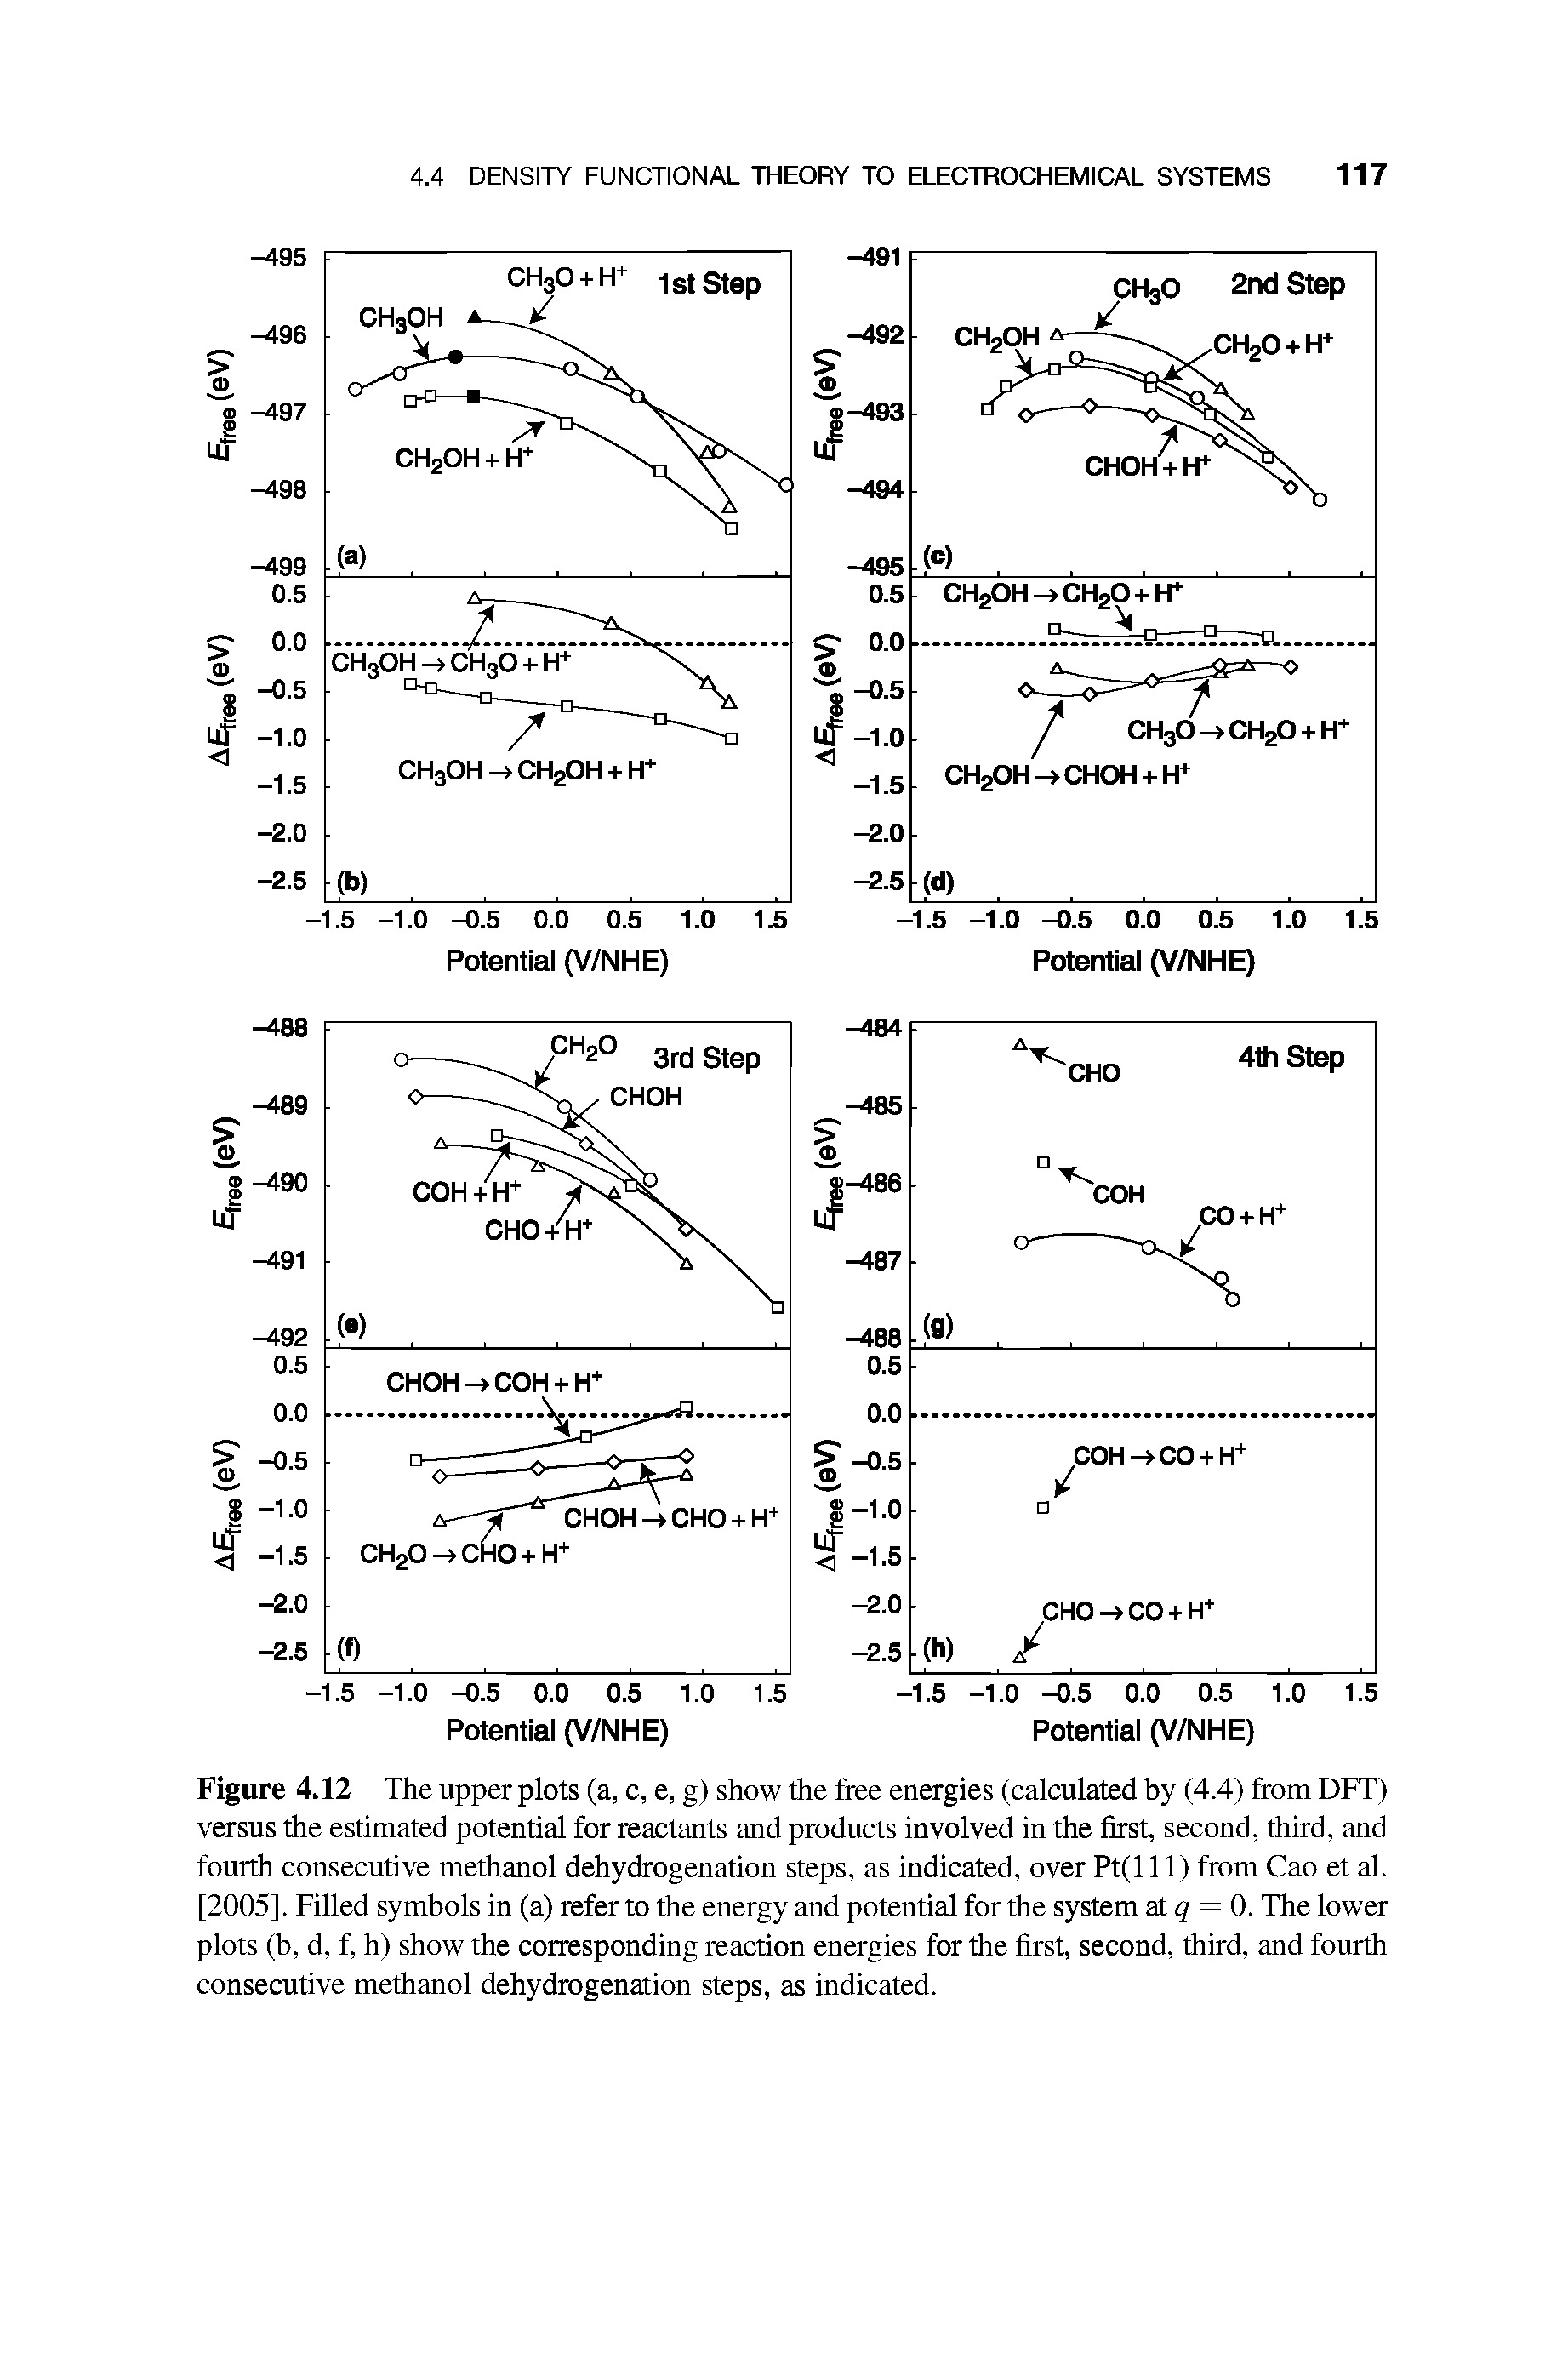 Figure 4.12 The upper plots (a, c, e, g) show the free energies (calculated by (4.4) from DFT) versus the estimated potential for reactants and products involved in the first, second, third, and fourth consecutive methanol dehydrogenation steps, as indicated, over Pt(lll) from Cao et al. [2005]. Filled symbols in (a) refer to the energy and potential for the system tq = Q. The lower plots (b, d, f, h) show the corresponding reaction energies for the first, second, third, and fourth consecutive methanol dehydrogenation steps, as indicated.